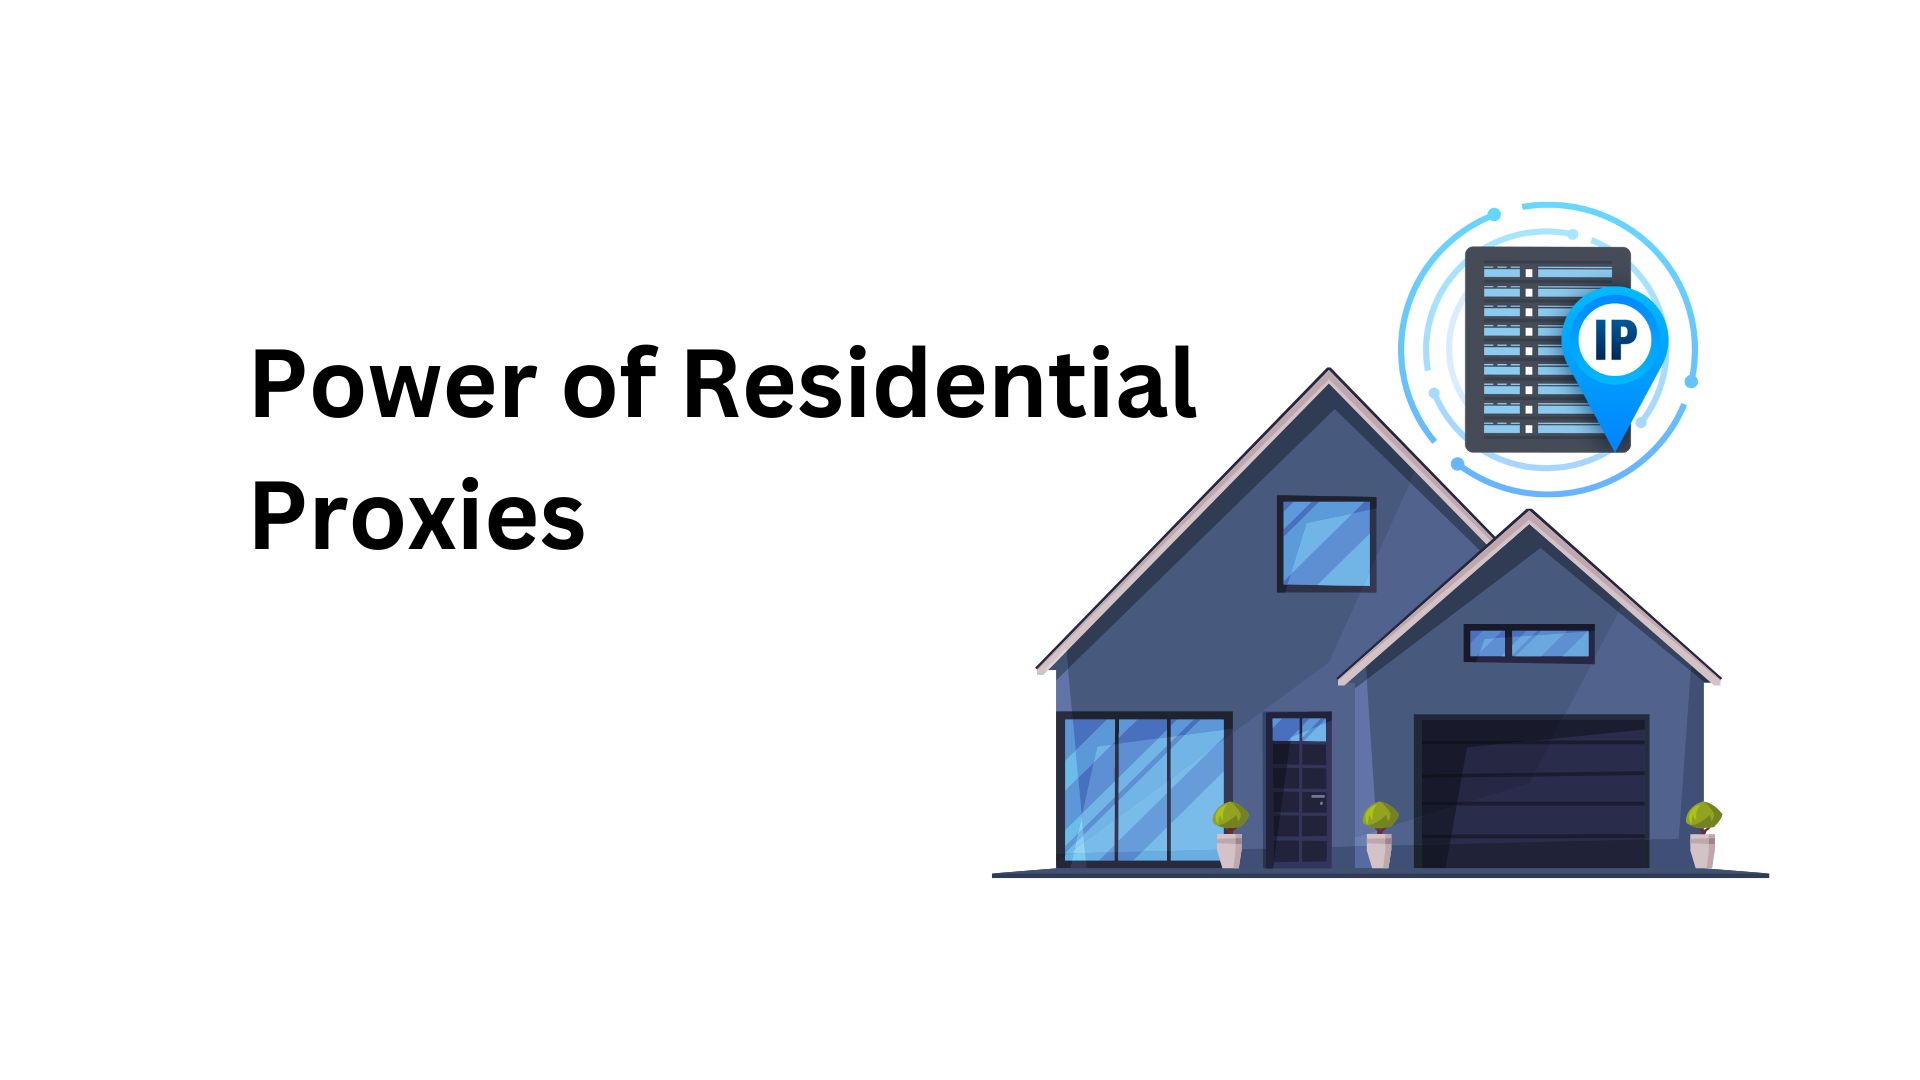 Unleashing the Power of Residential Proxies: How to Gather Data at Scale